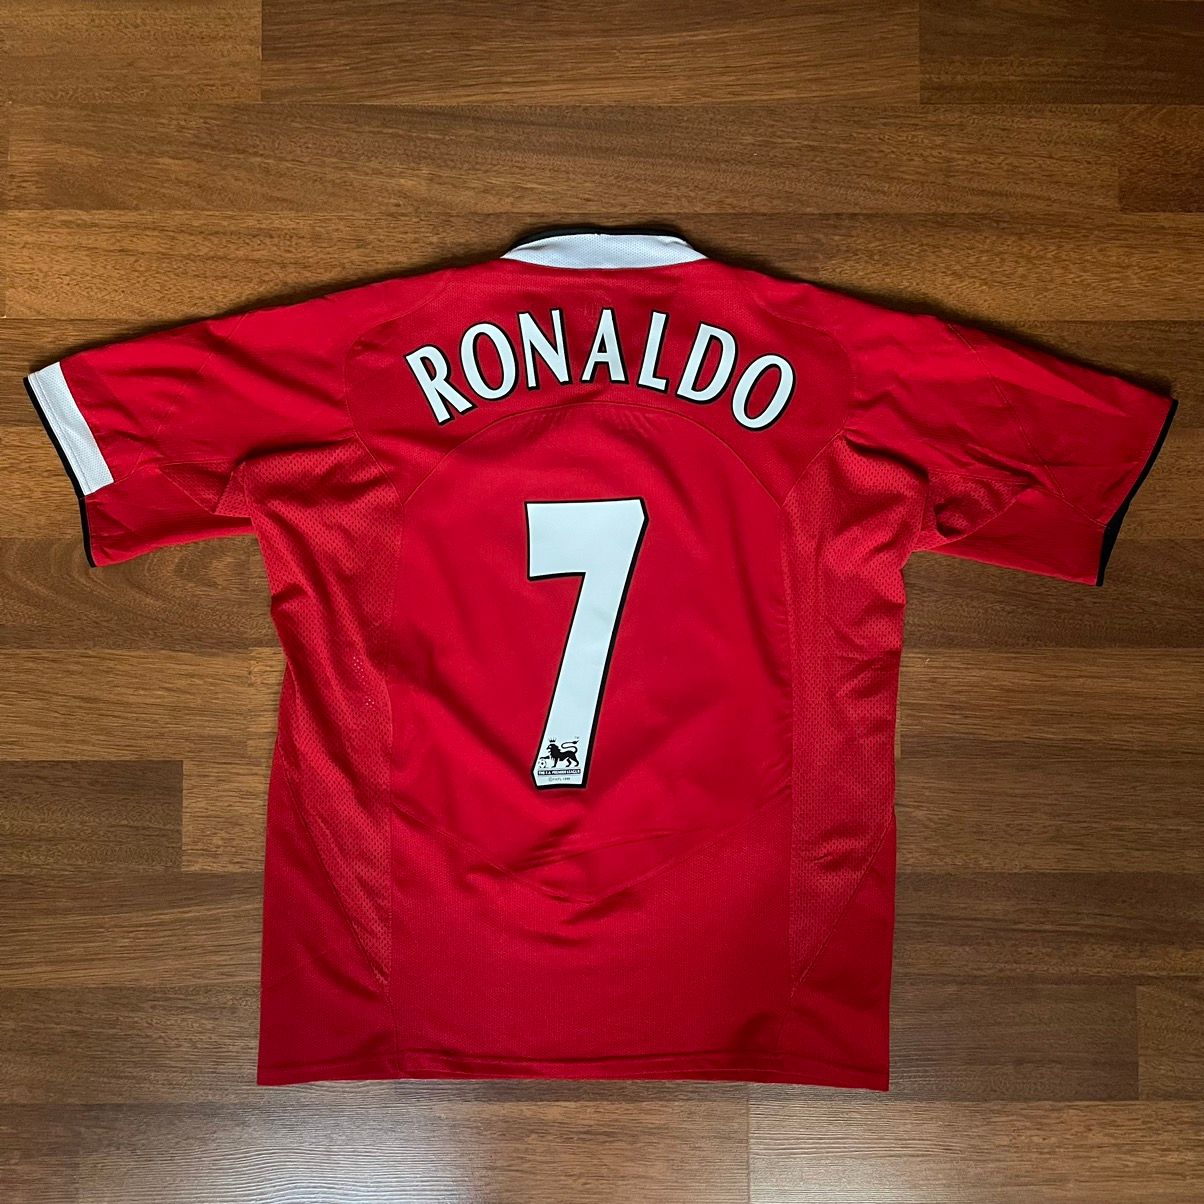 Pre-owned Nike X Soccer Jersey Manchester United Nike 2004/2006 Football Jersey 7 Ronaldo In Red